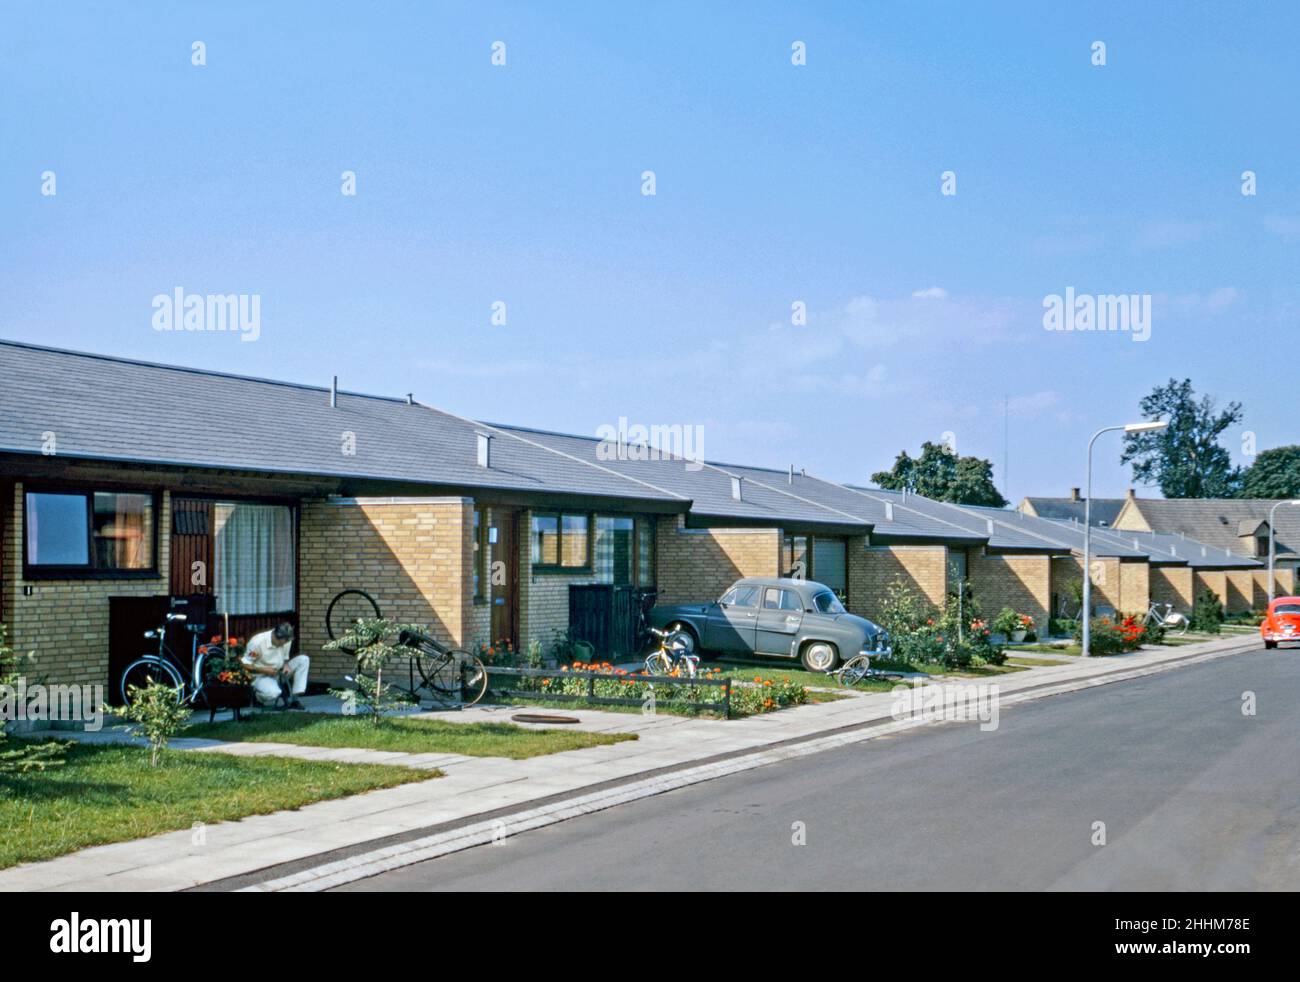 Single-storey housing in a development of post-war modern houses in Odense, Funen, Denmark in 1970. Odense is the third-largest city in Denmark and is the main city of the island of Funen. One man is repairing bicycles in his driveway. This image is from an amateur 35mm Kodak colour transparency – a vintage 1970s photograph. Stock Photo